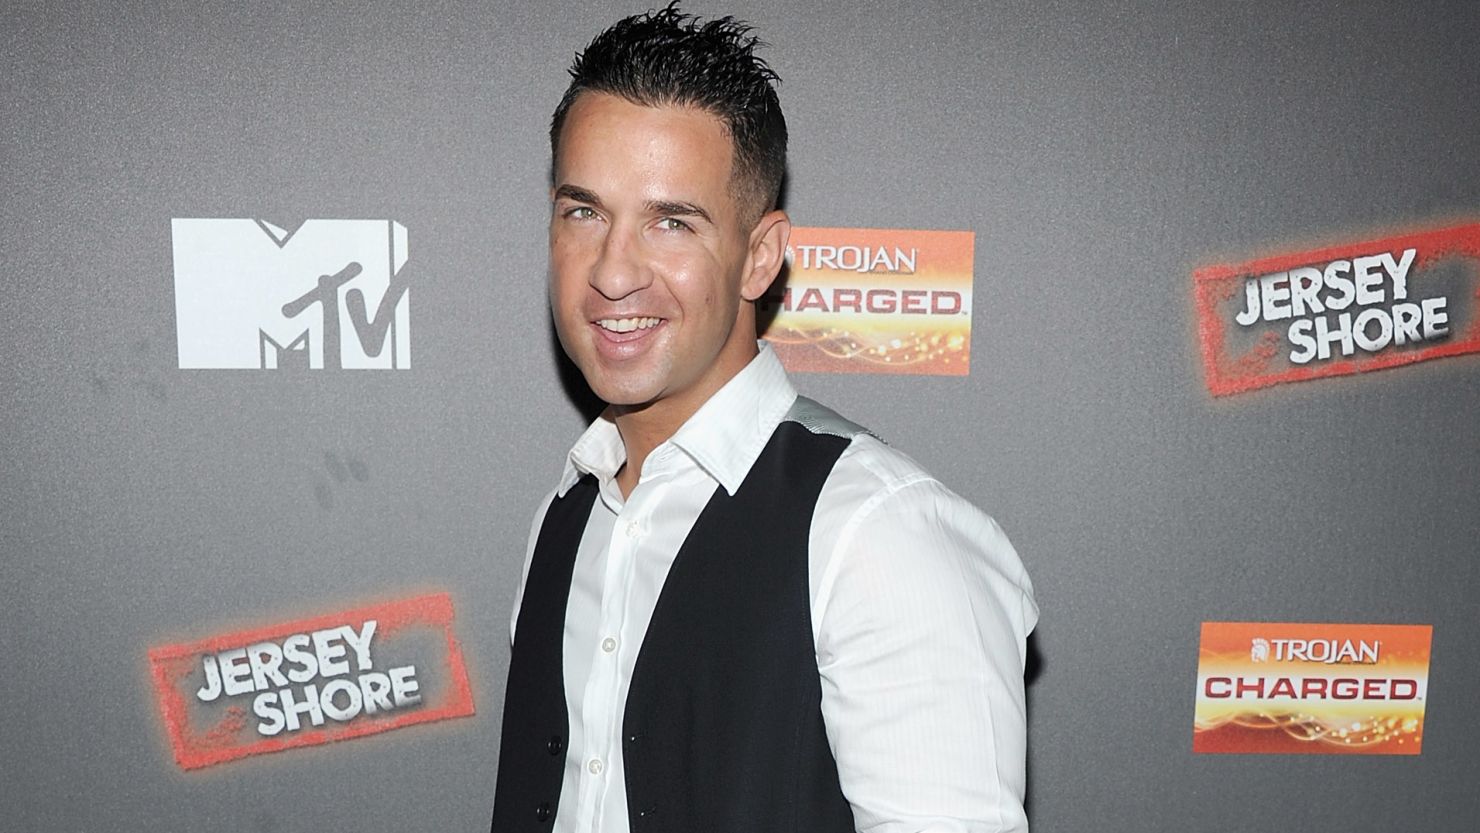 Mike "The Situation" Sorrentino got into a fight inside a tanning salon he co-owns with his brother. 